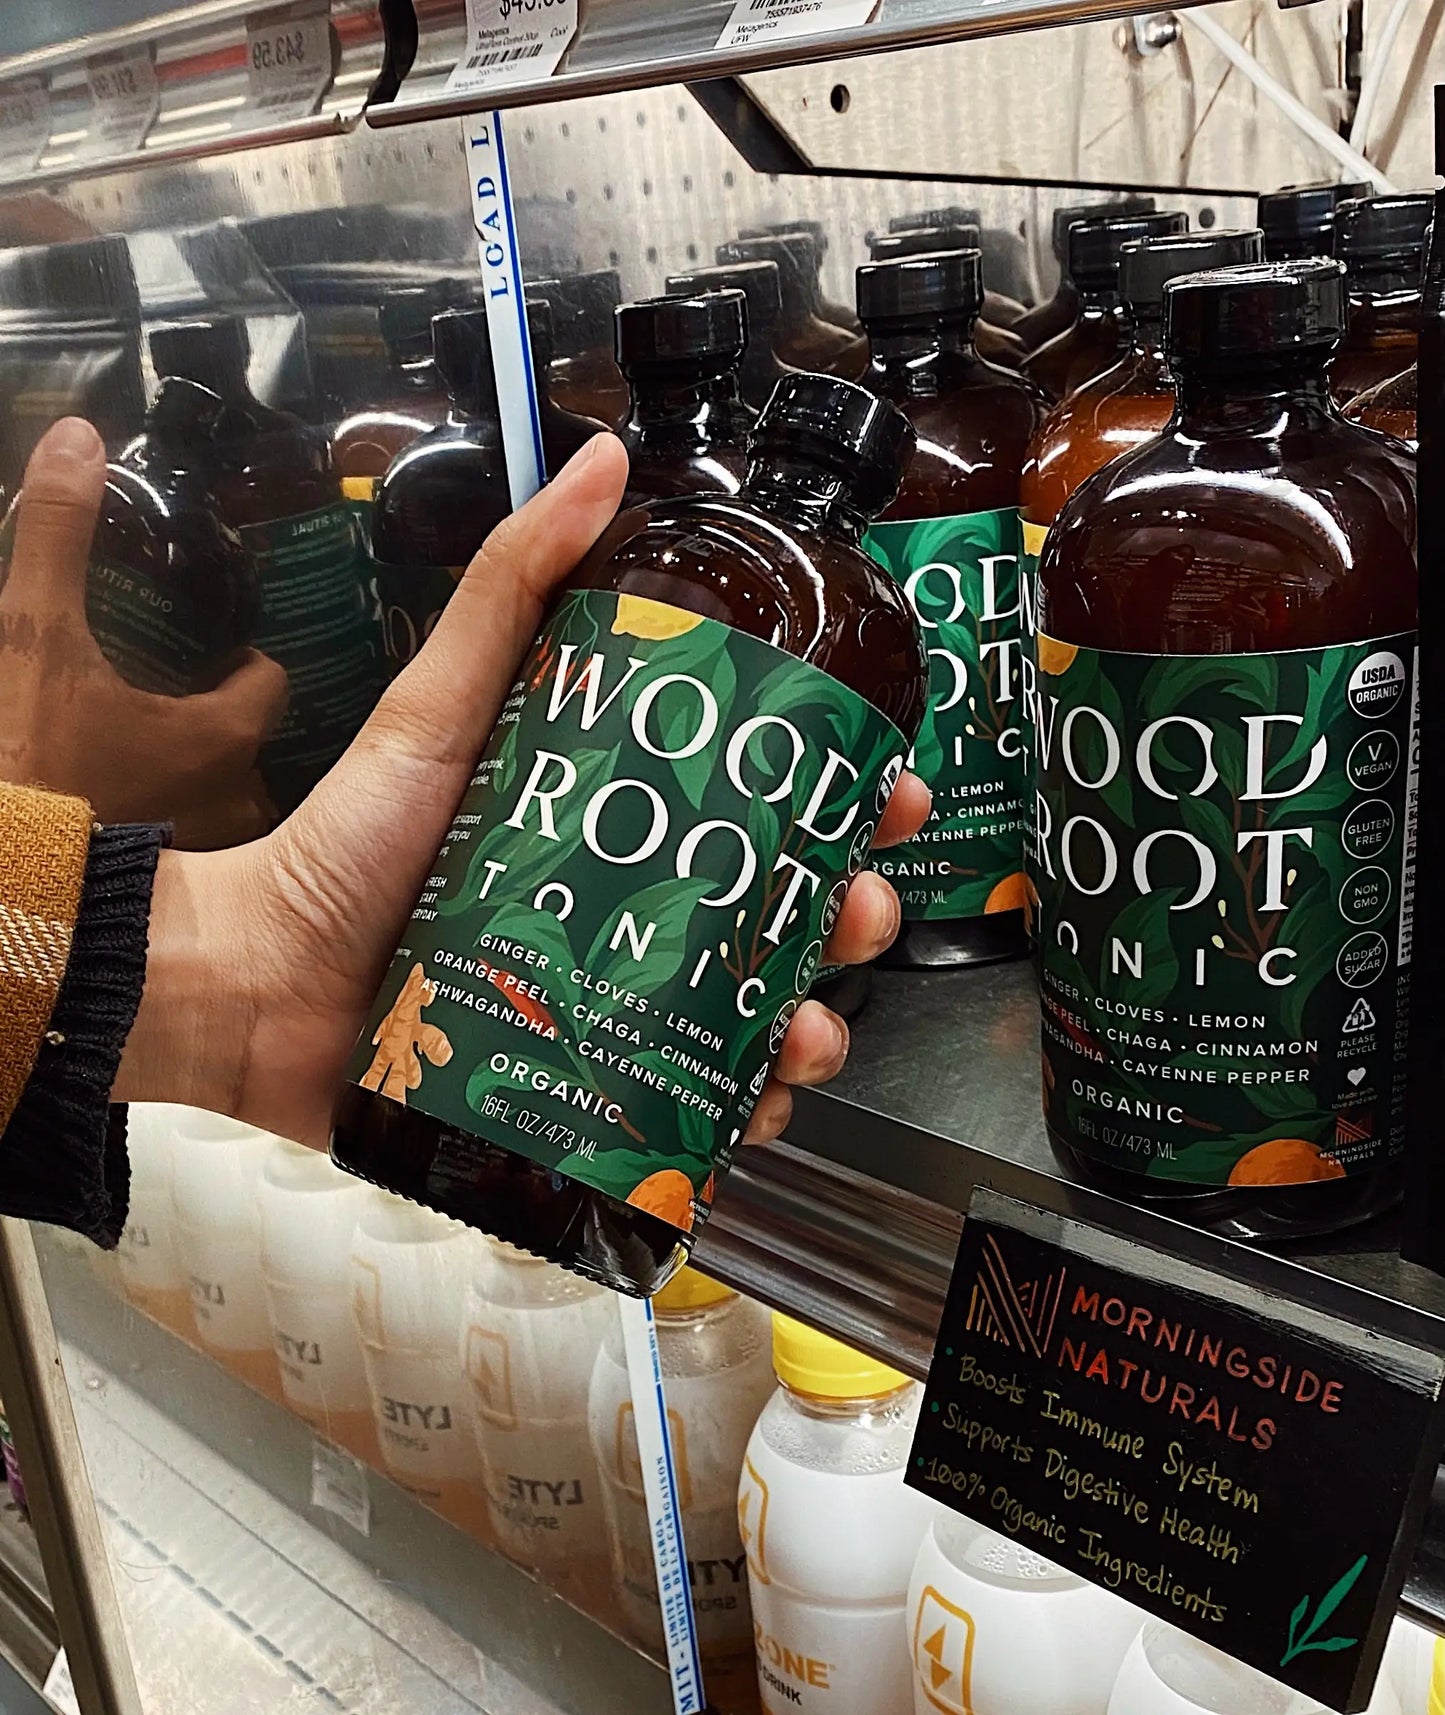 Hand picking up Woodroot Tonic bottle from the shelves of a store. 